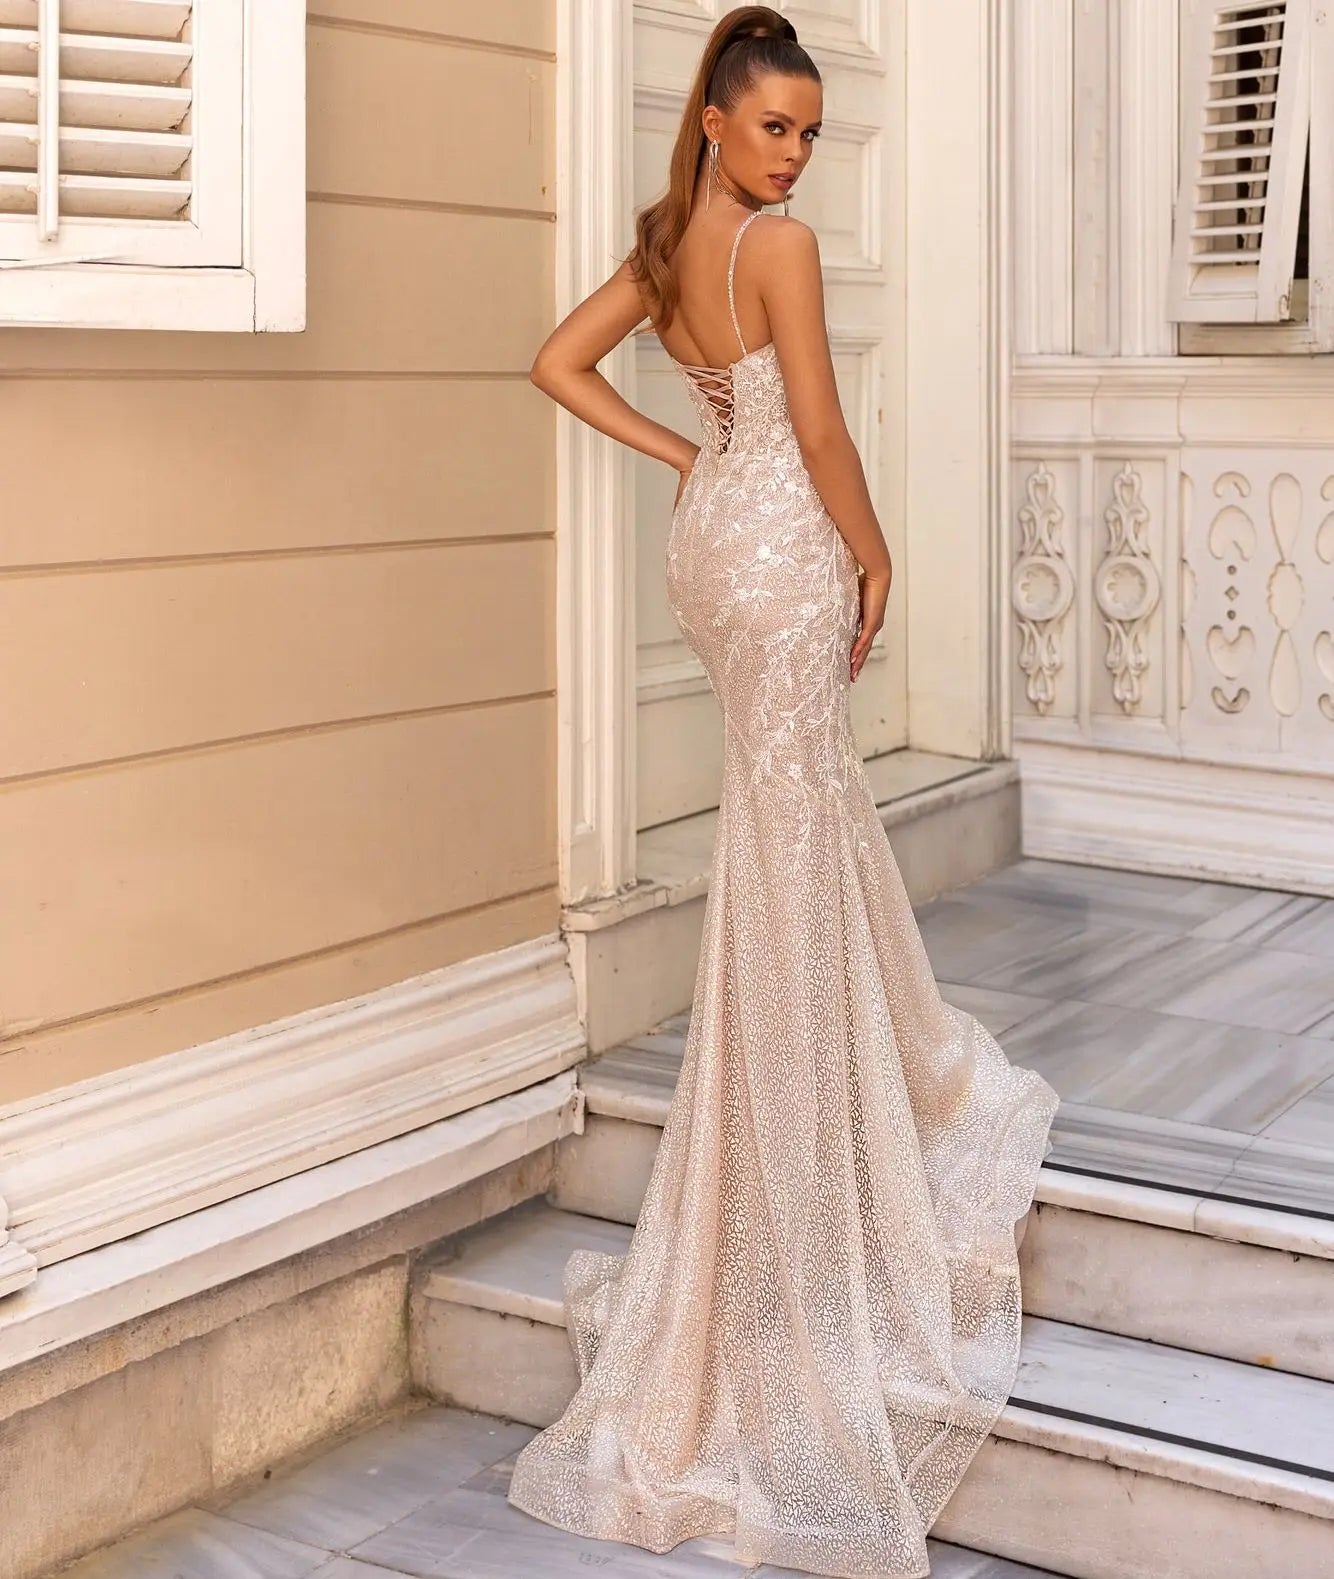 UU-Glitter Spaghetti Straps Mermaid Wedding Dress  Lace Appliques Sexy Sweetheart Bridal Gowns Sparkly Robe